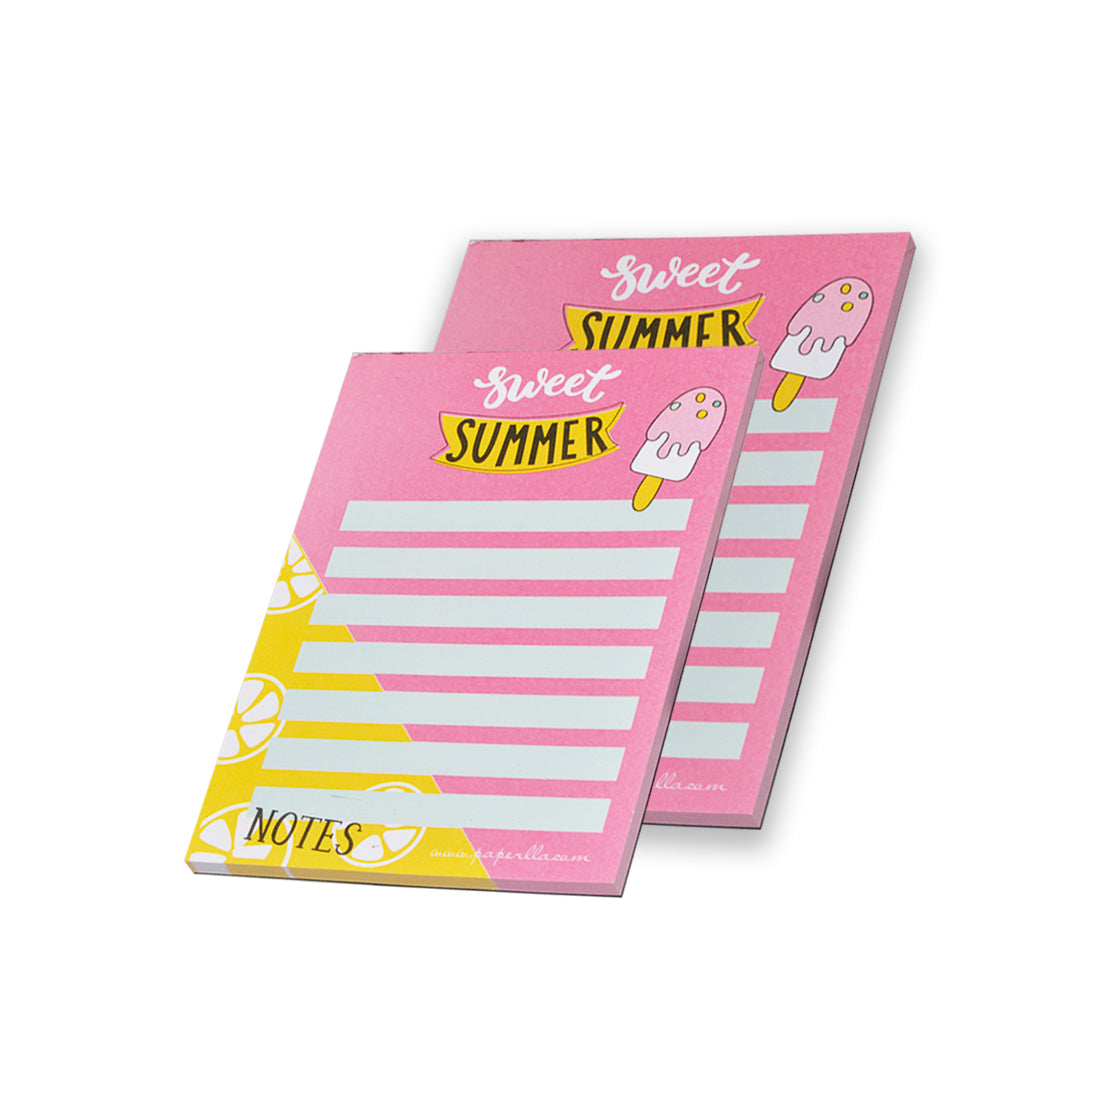 NOTES DIARY WRITING PADS , CUTE STATIONERY TO DO LIST ORGANIZER DAILY JOURNAL, SET OF 4